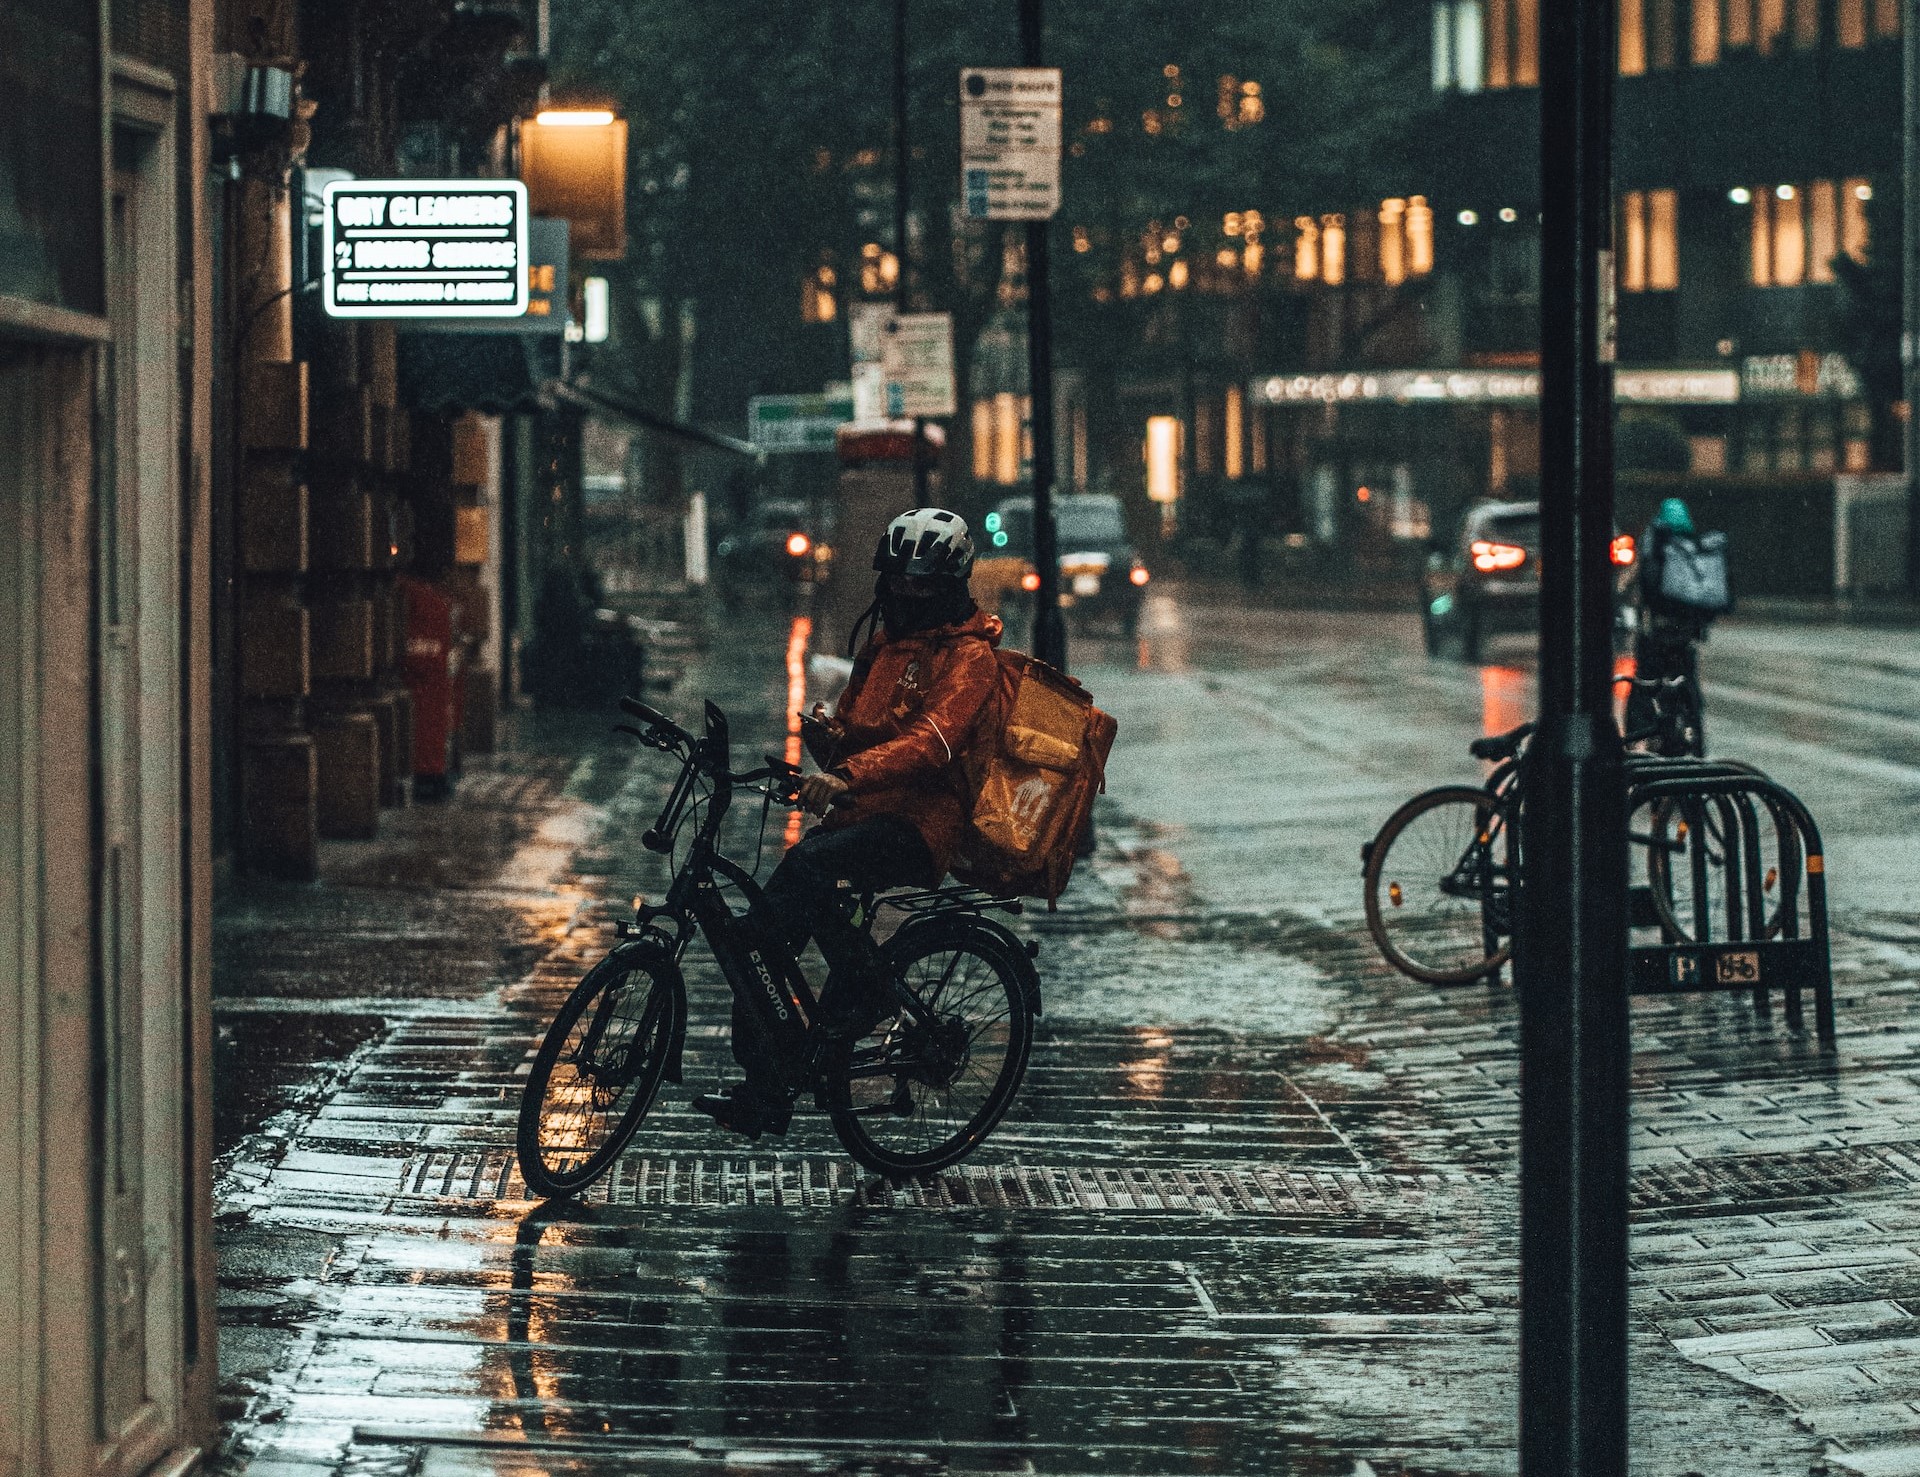 A food delivery cyclist